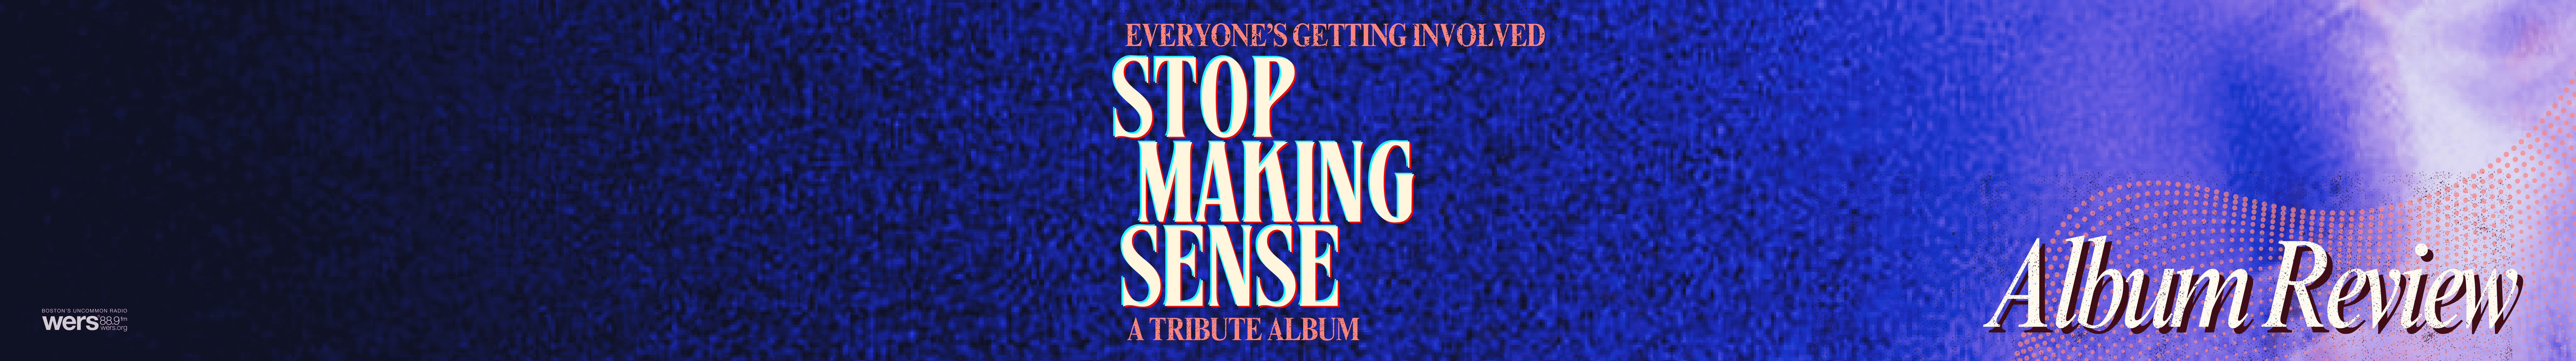 A grainy, film photo of David Byrne in the iconic oversized suit he appears in for "Stop Making Sense." Behind him is a grainy blue background with a line of orange text that reads "Everyone's Getting Involved." Below that, white text reads "Stop Making Sense." And a third line has orange text reading "A tribute album."